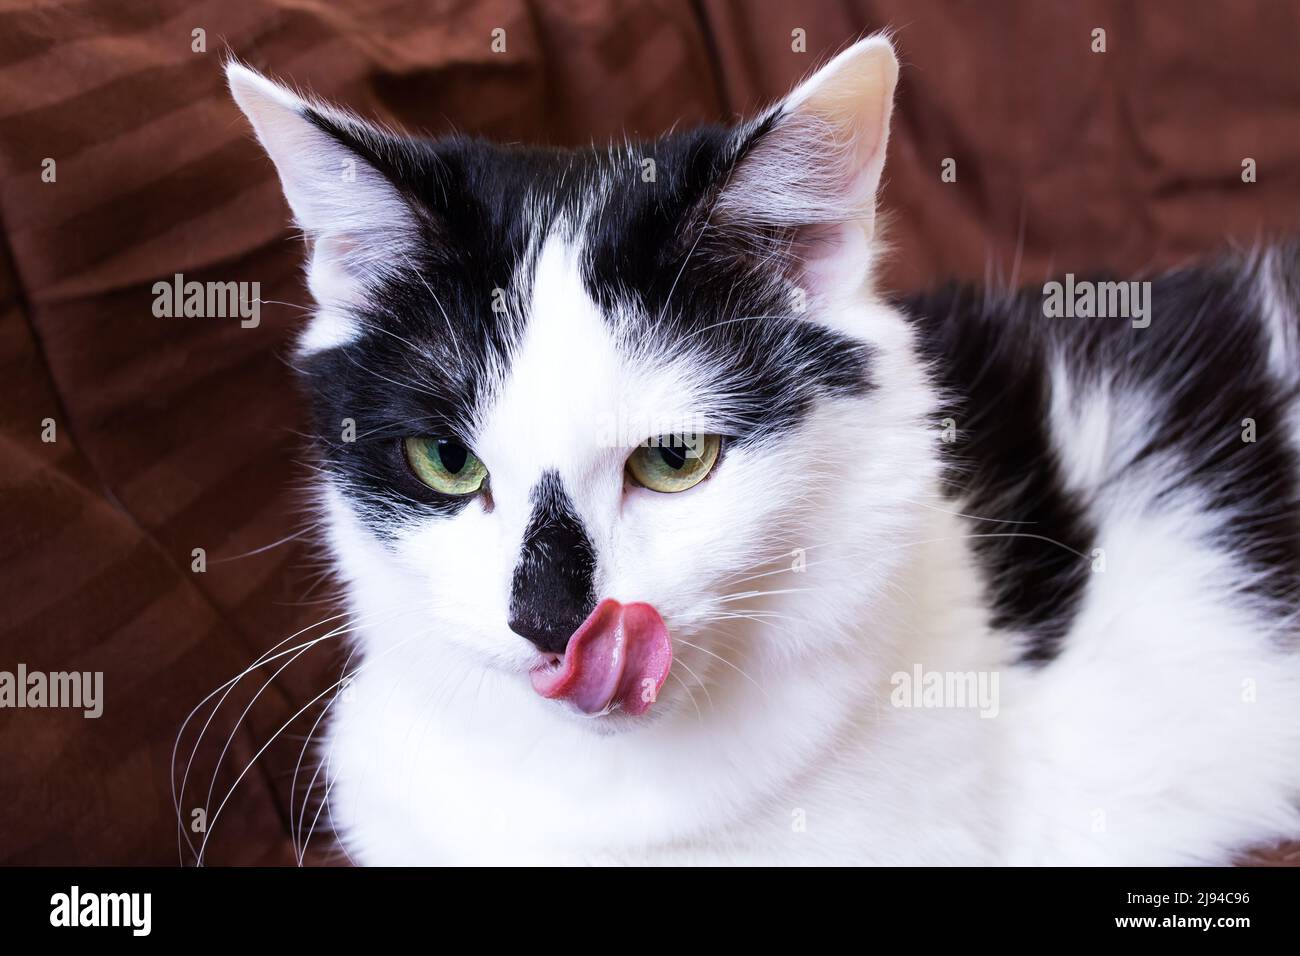 Black and white cat licking it self Stock Photo